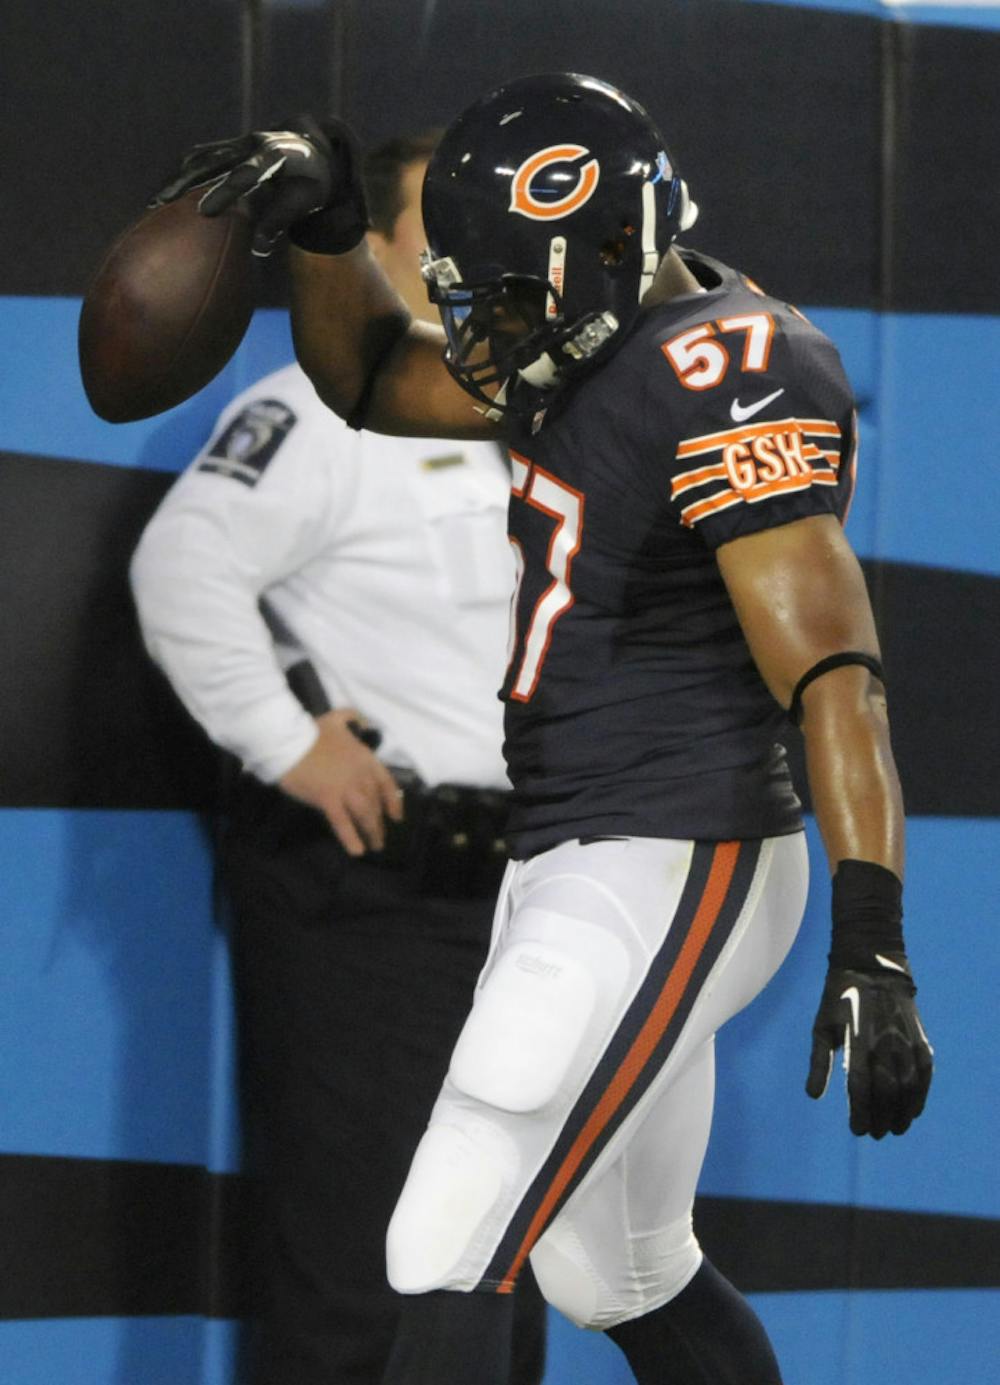 <p>Chicago Bears' Jon Bostic (57) spikes the ball in the end zone after returning an interception for a touchdown against the Carolina Panthers during the first half of a preseason NFL football game in Charlotte, N.C., on Aug. 9.</p>